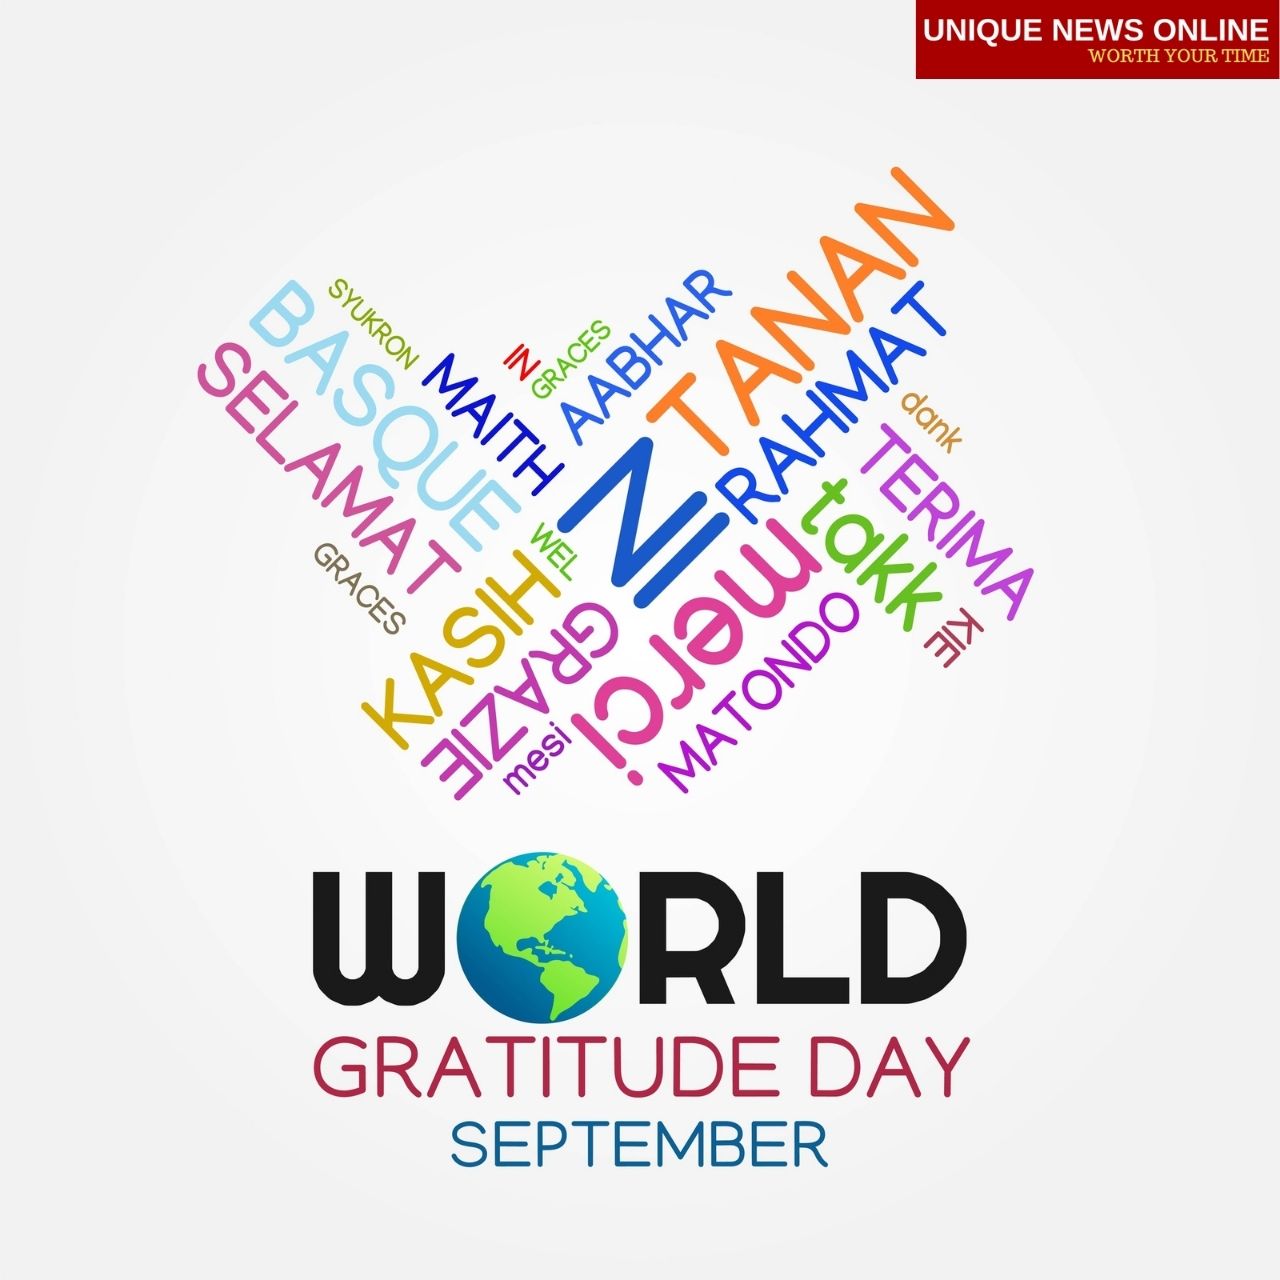 World Gratitude Day 2021 Quotes, Wishes, HD Images, Social Media Posts, Greetings, and Messages to Share